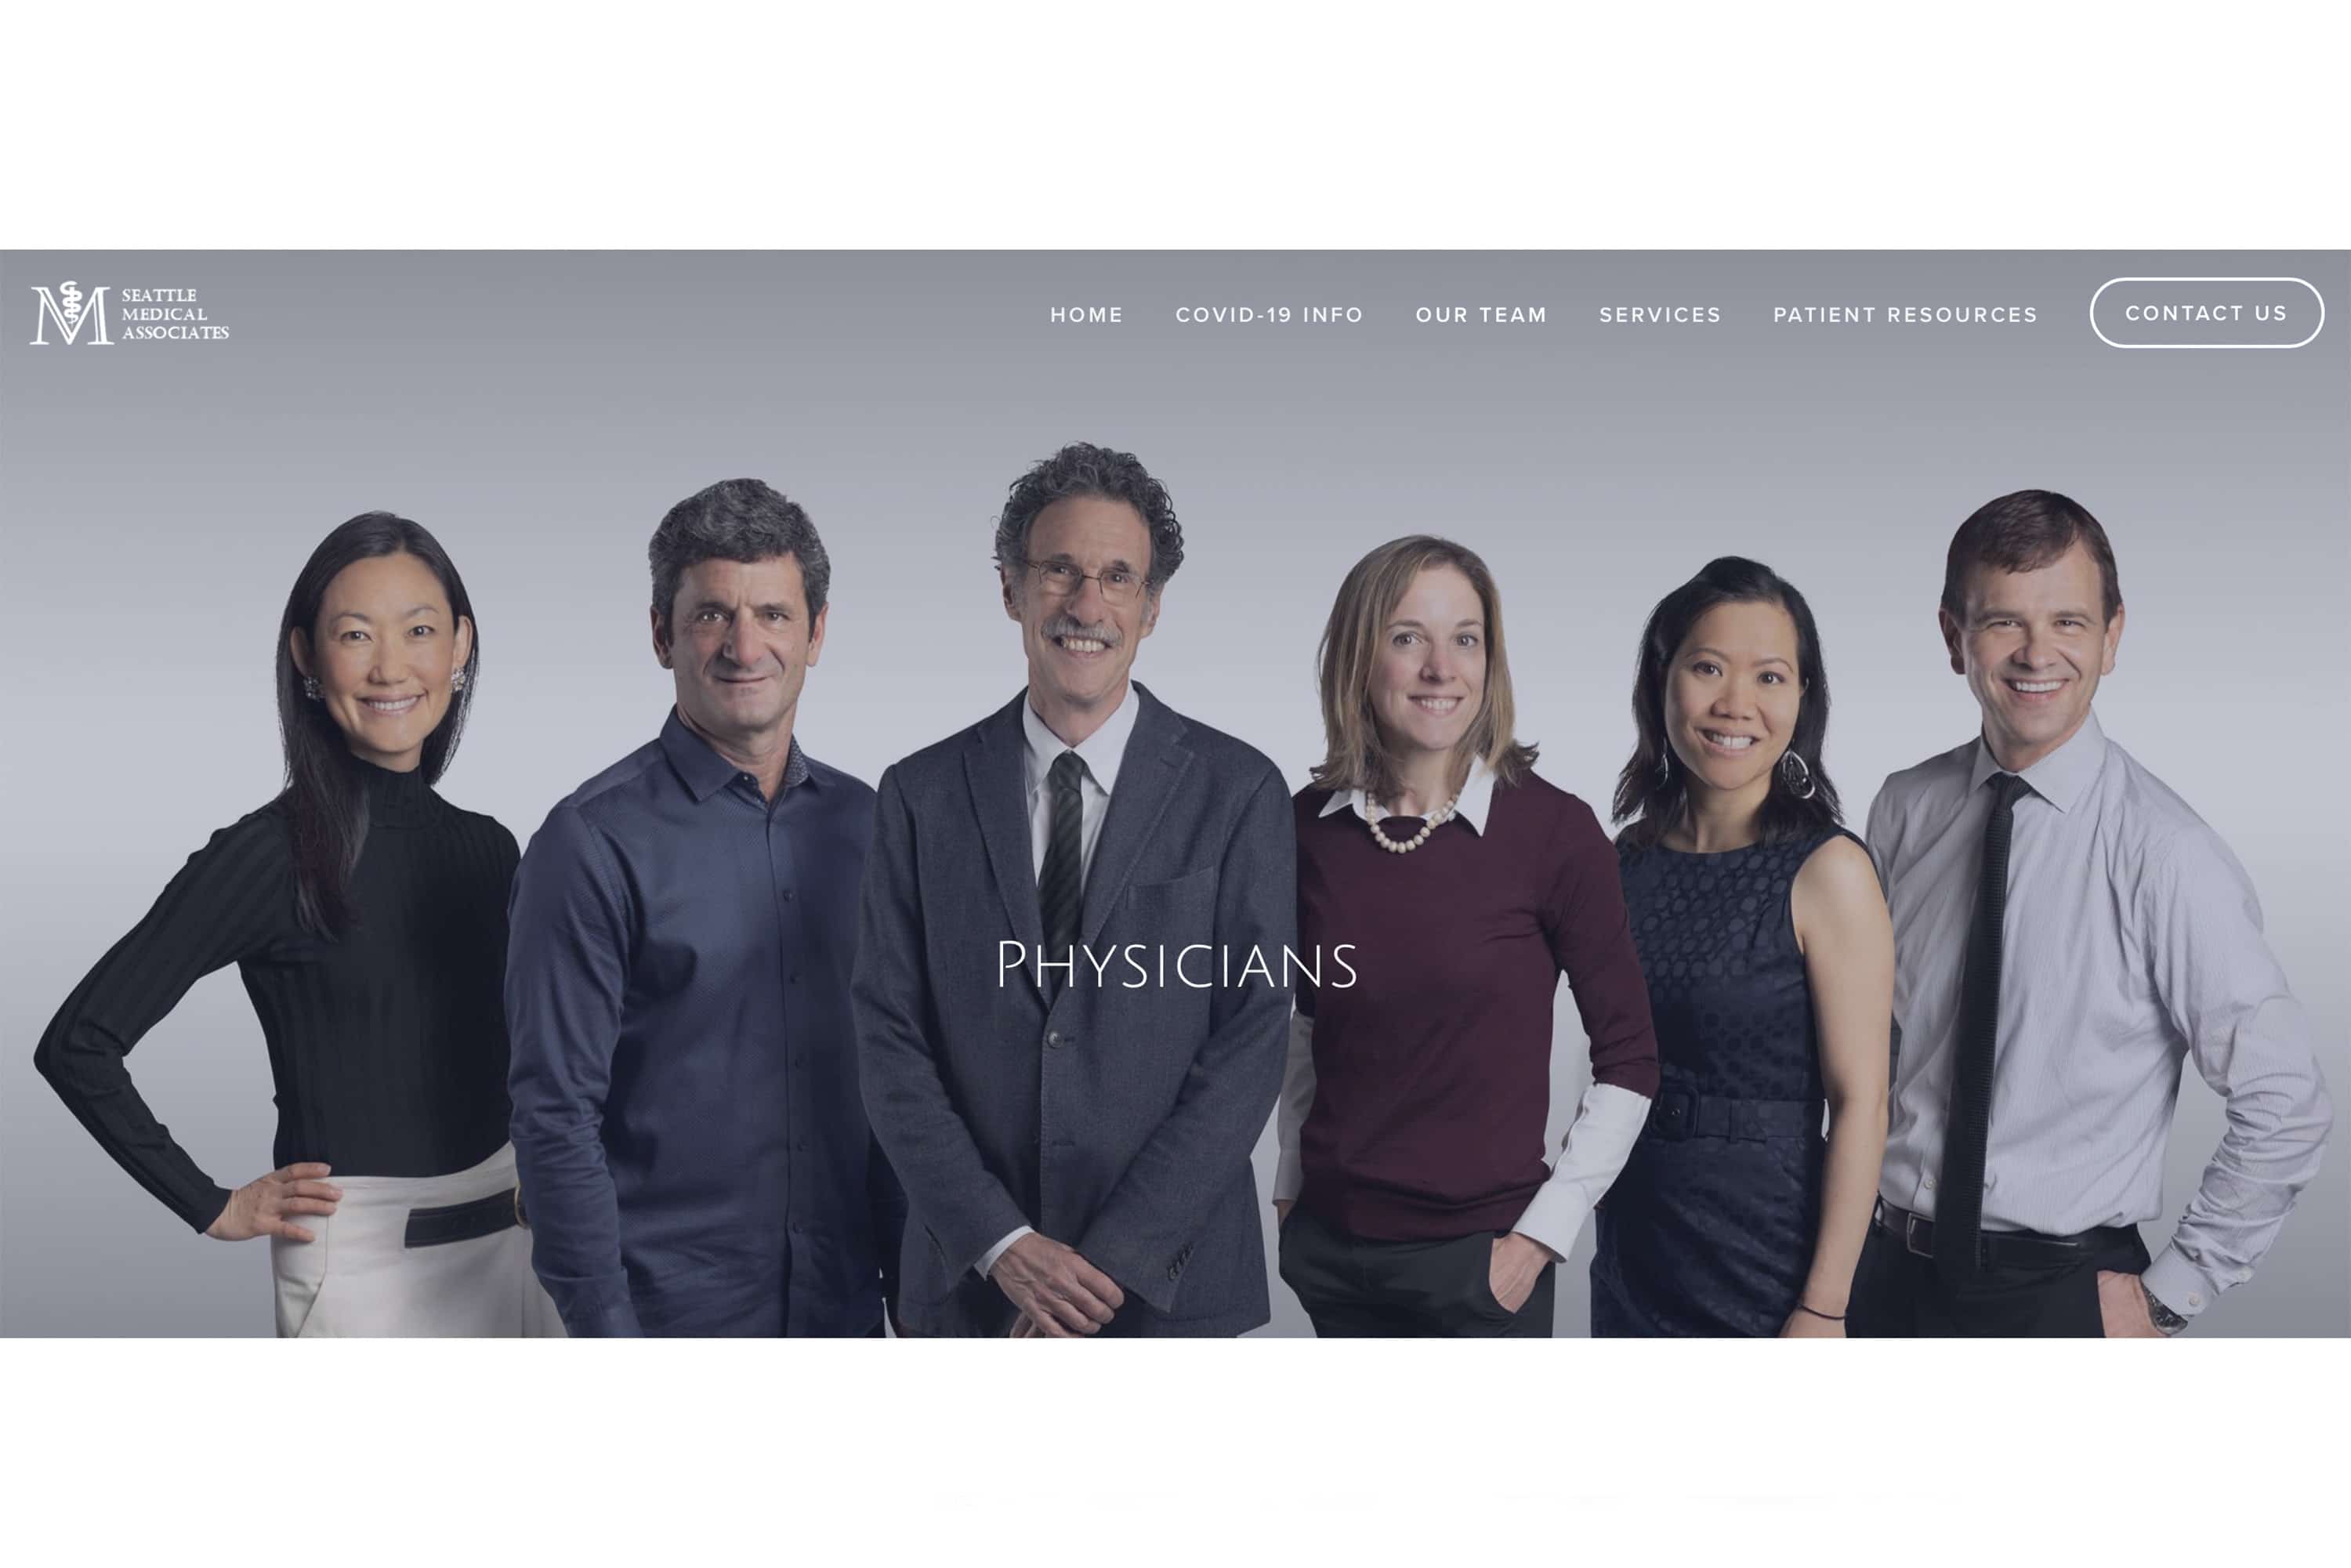 Group photo of physicians dressed formally and smiling for the camera.